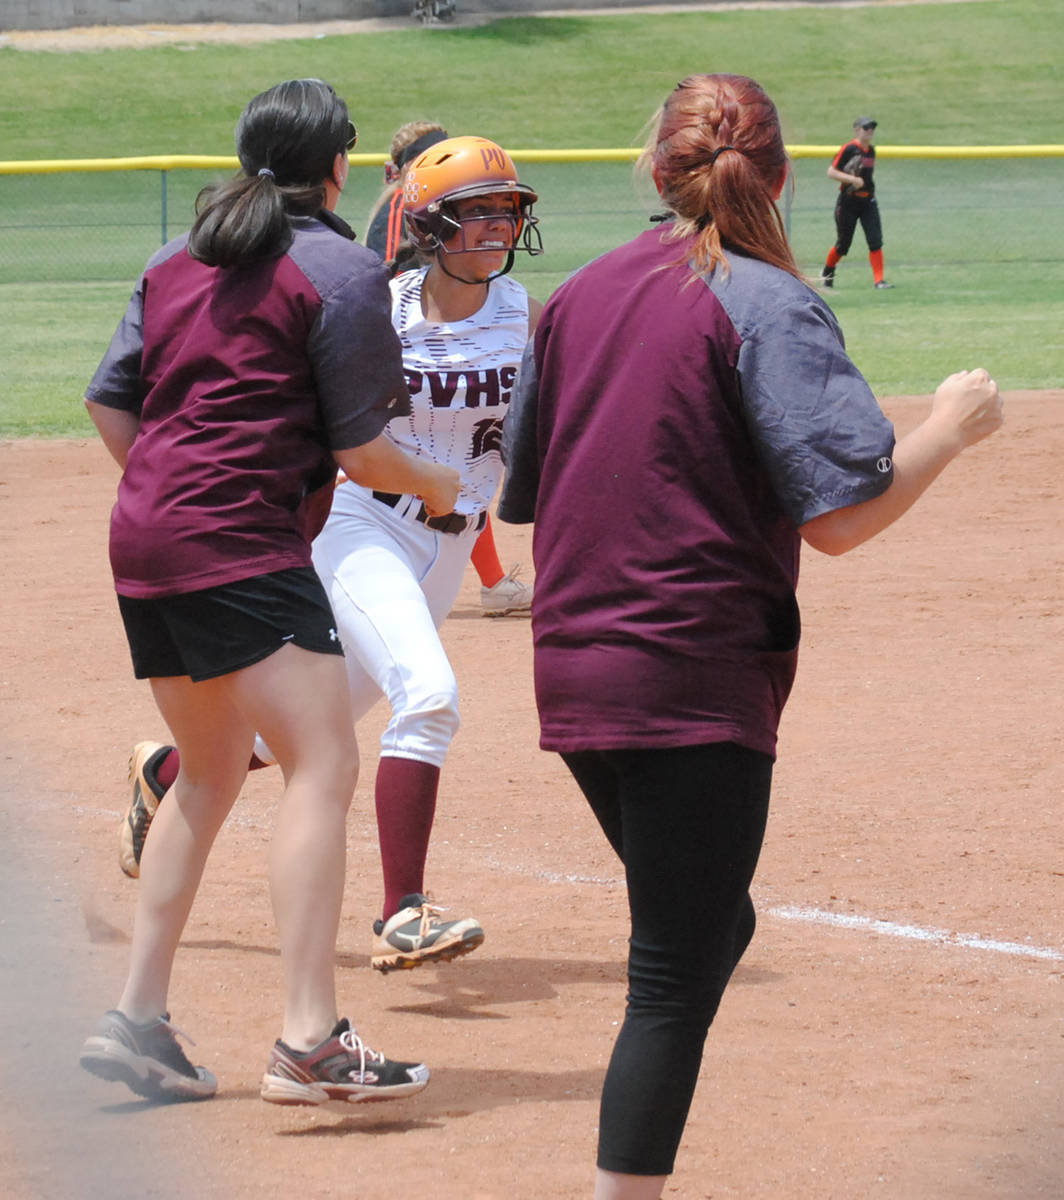 Cassondra Lauver/Special to the Pahrump Valley Times Kaden Cable, shown rounding third after hi ...